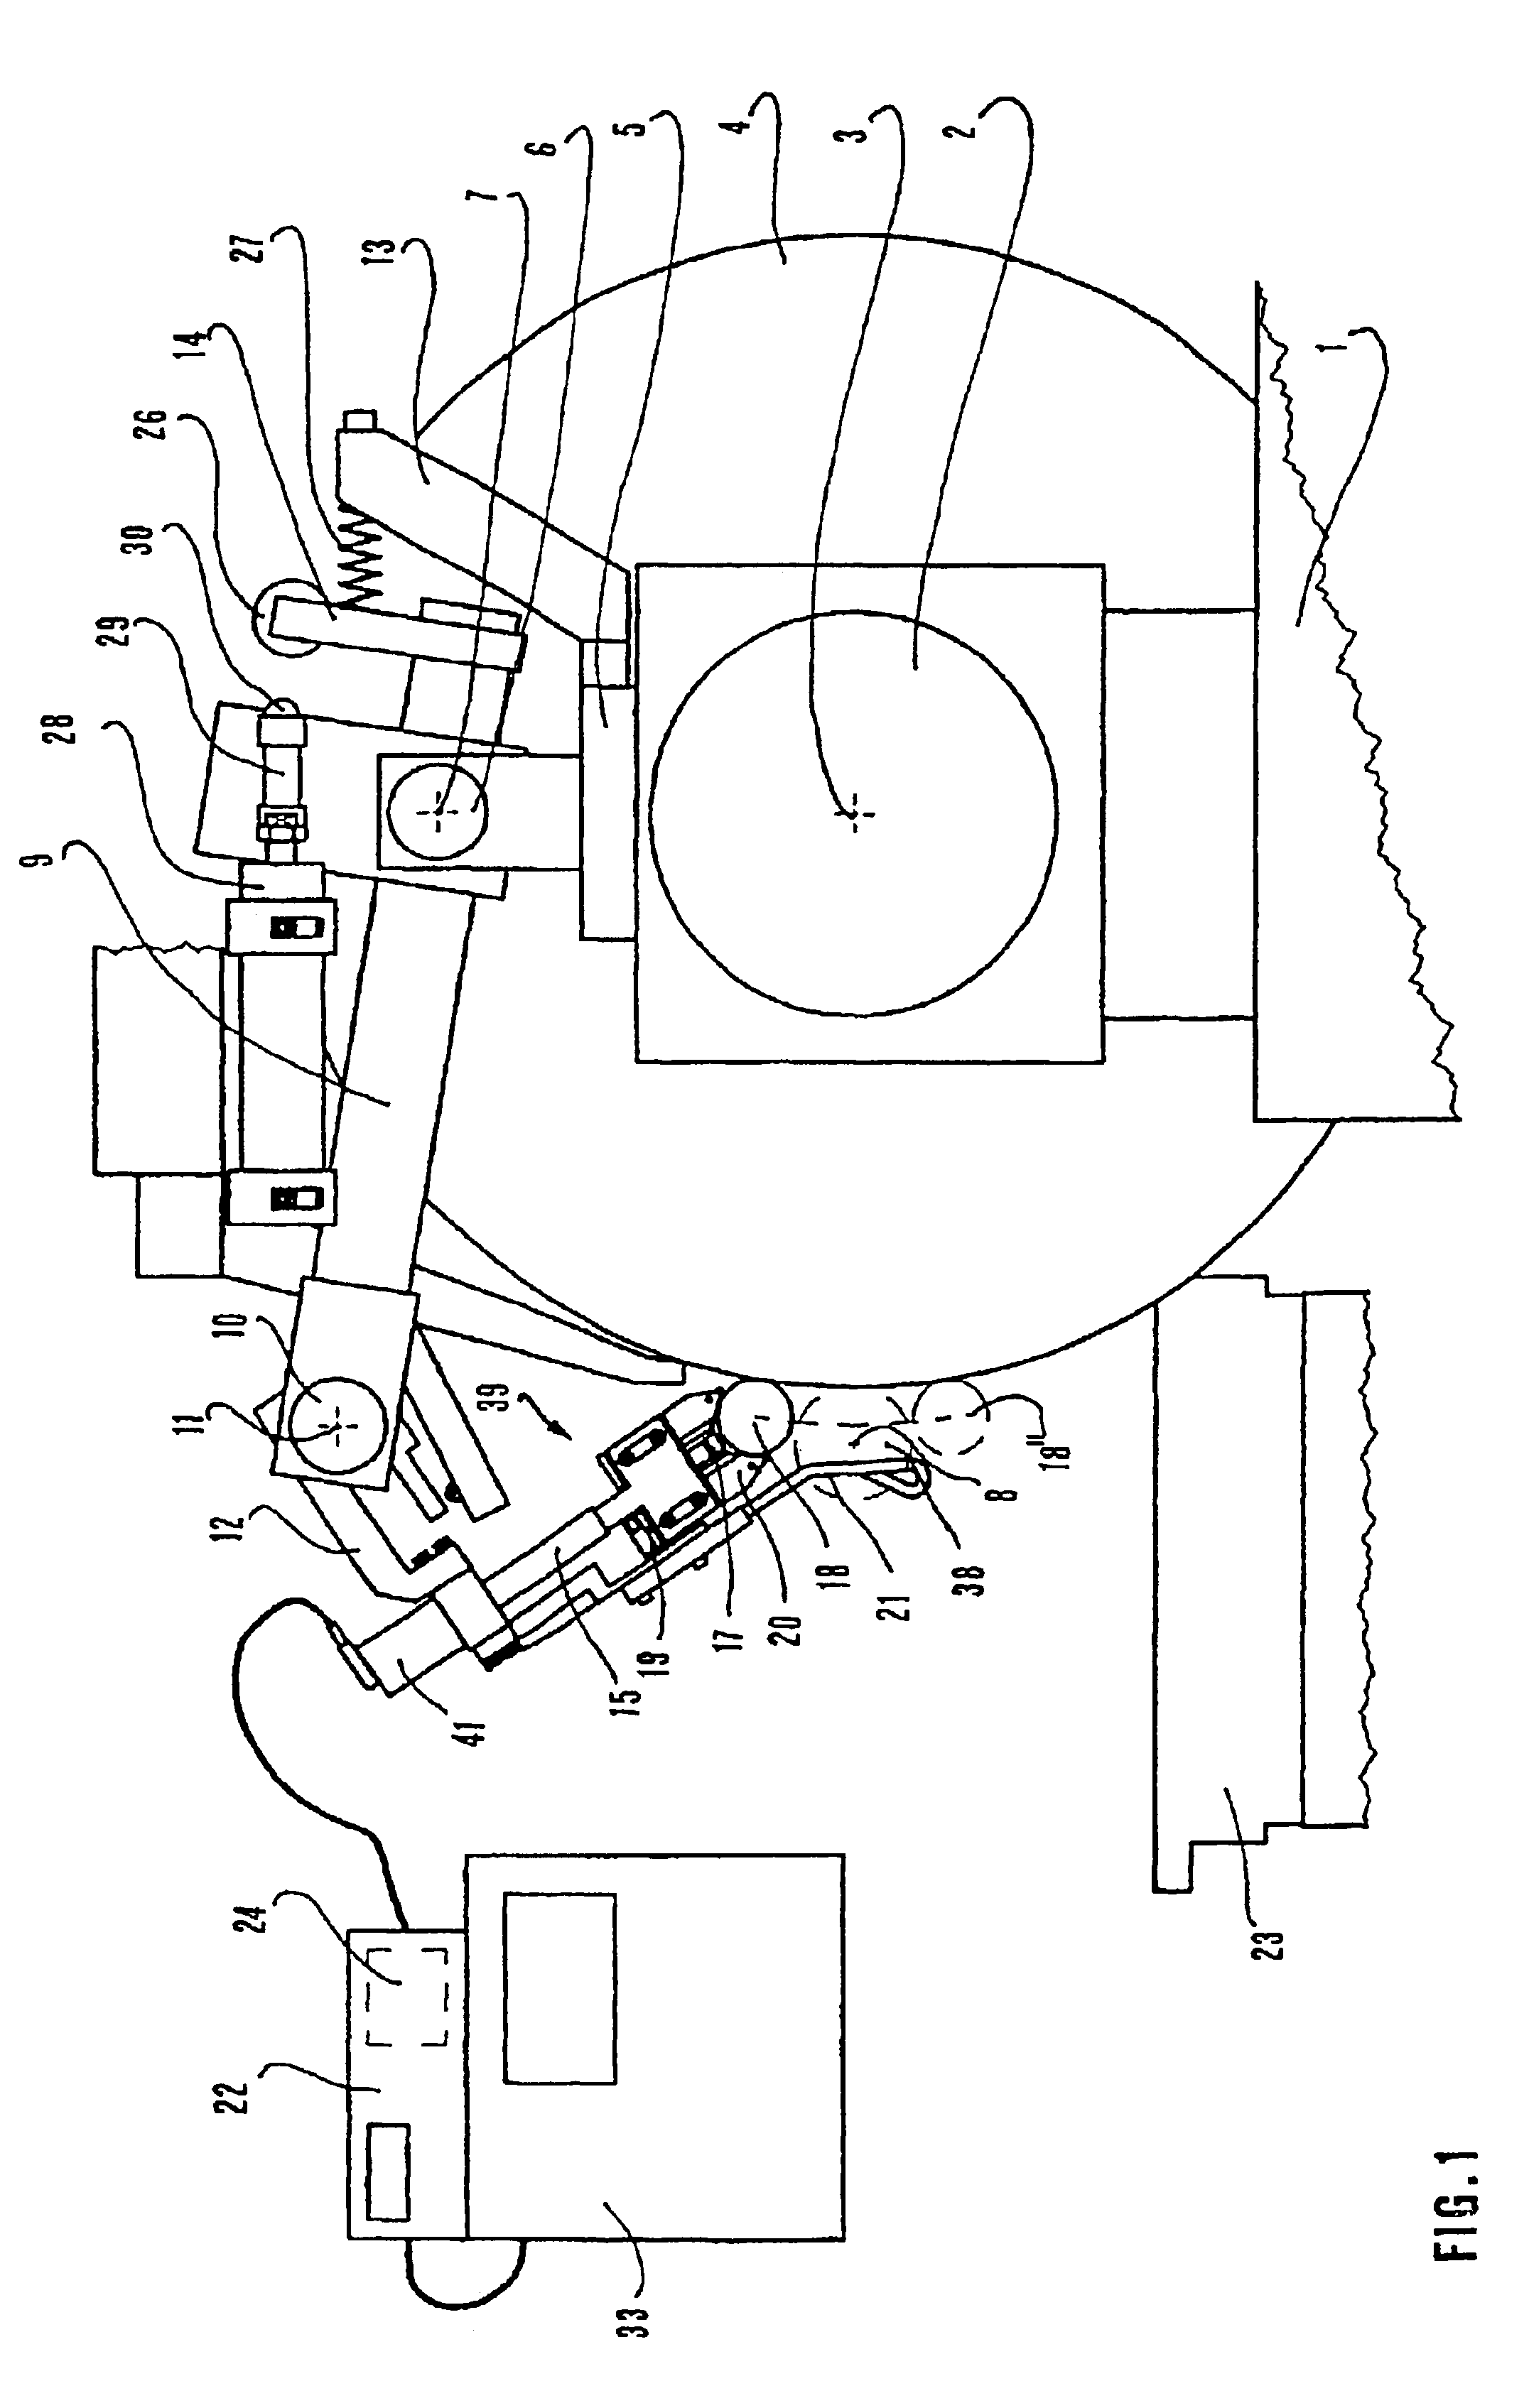 Apparatus and methods for measuring the pin diameter of a crankshaft at the place of grinding